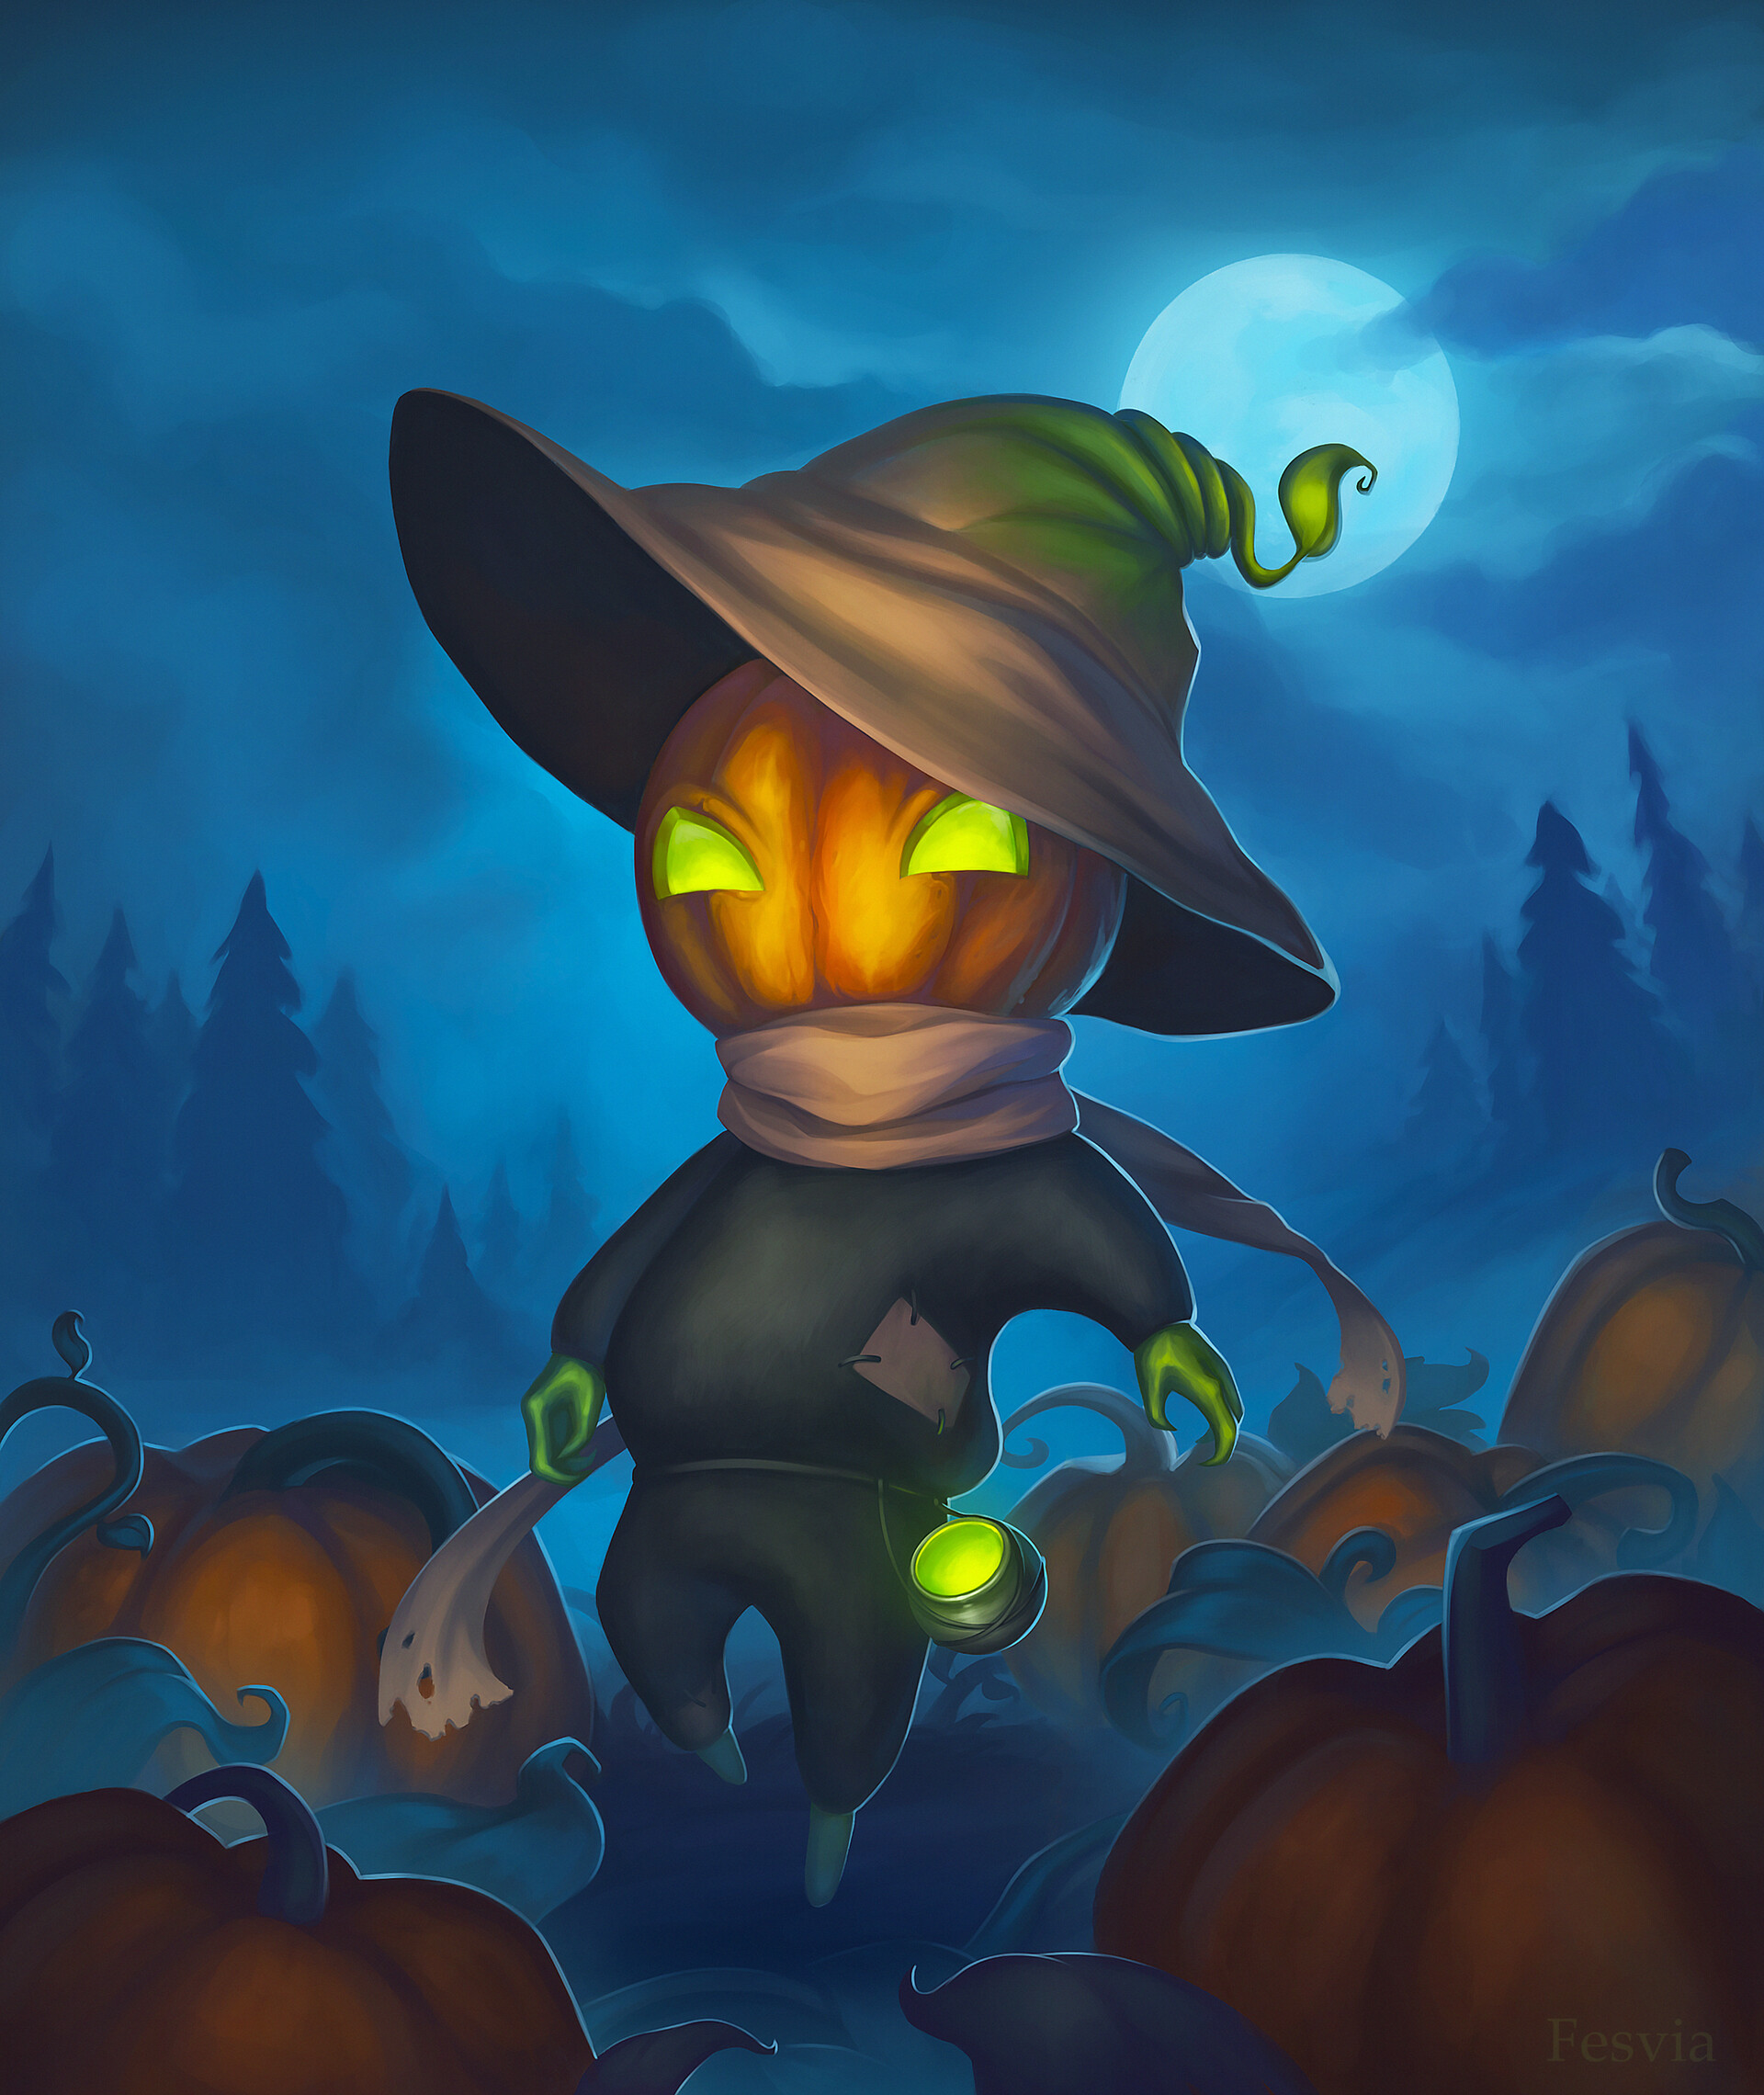 ArtStation - Pumpkin character for the game